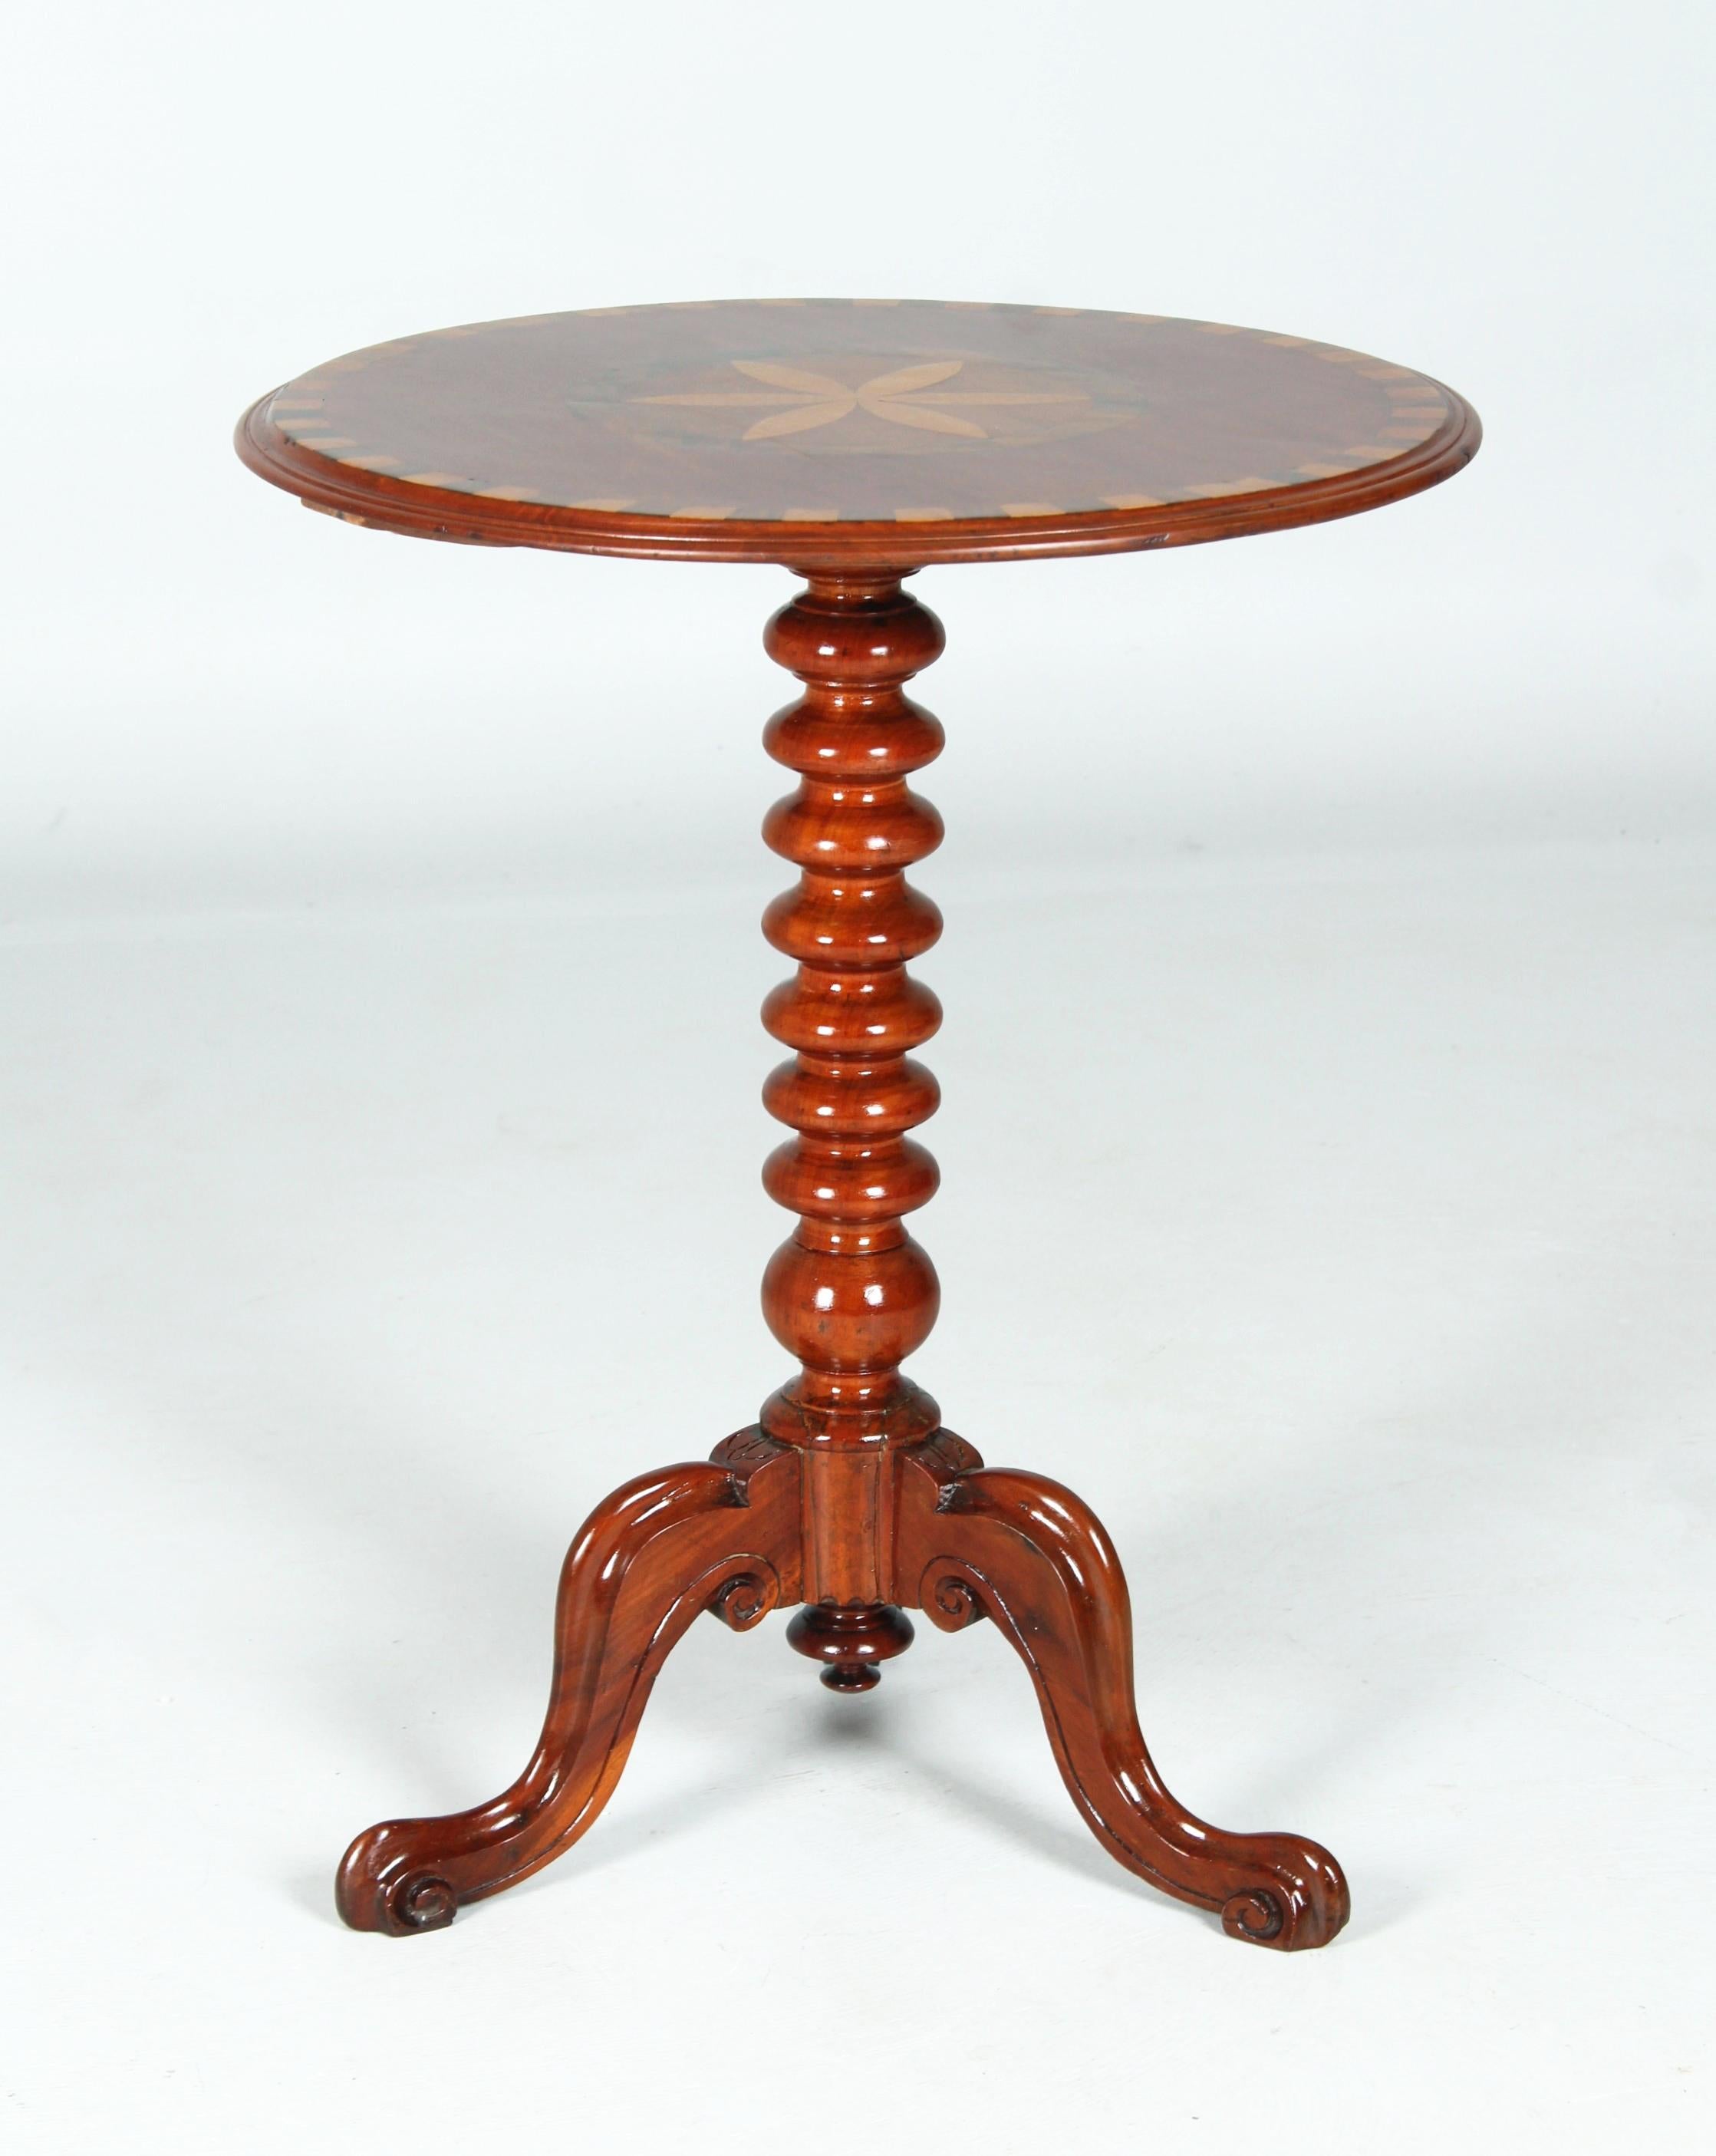 Antique side table with star inlay

England
Mahogany and others
second half of the 19th century.

Dimensions: H x D: 71 x 57 cm

Description:
Small table standing on a three-legged, carved base with a turned centre column and inlaid top.
The inlays